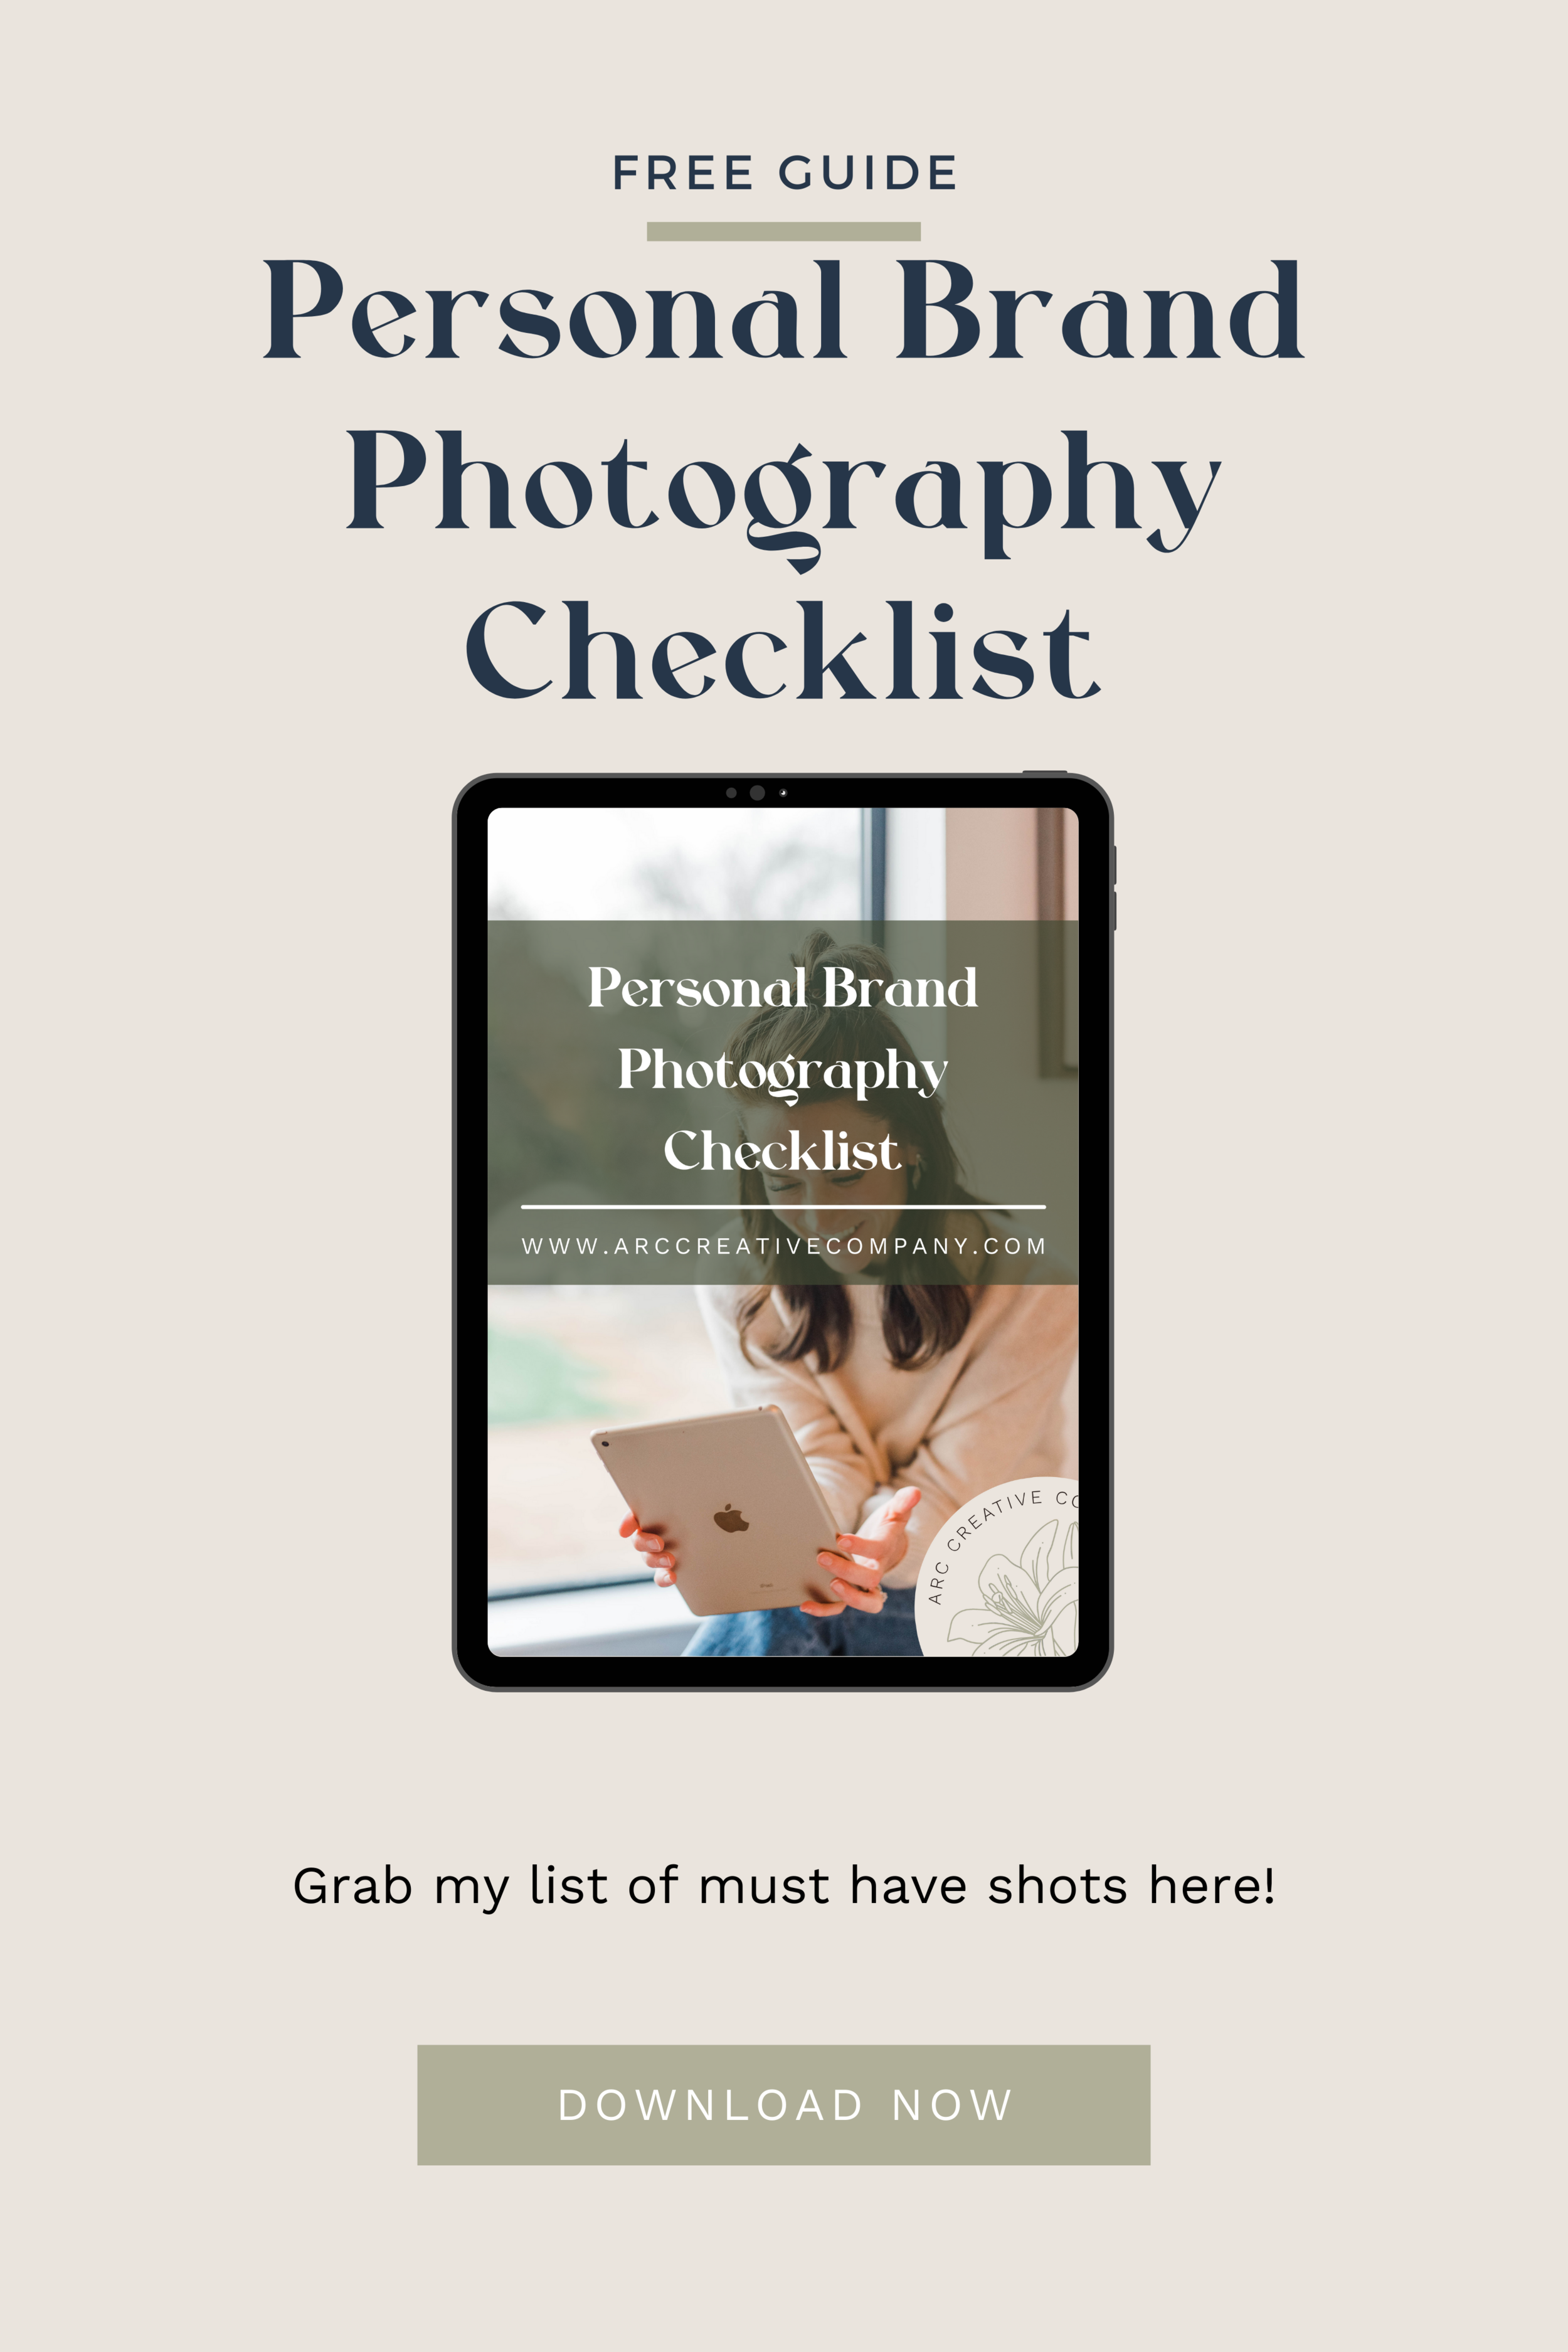 Download Free Guide - Pinterest Pin.png